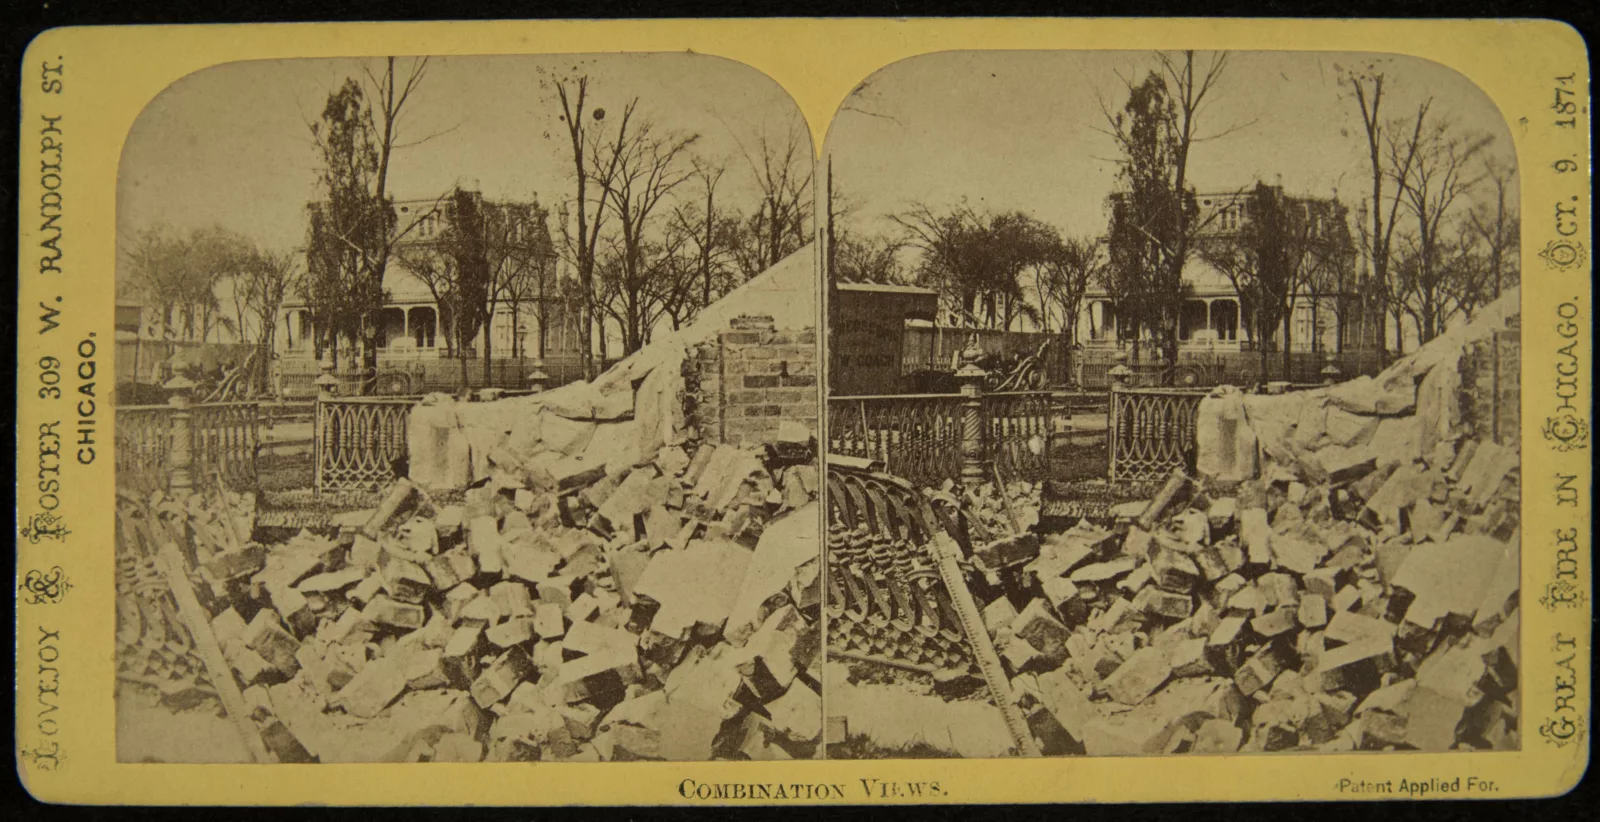 The Ogden house sits intact behind rubble and other structures that did not survive the fire.